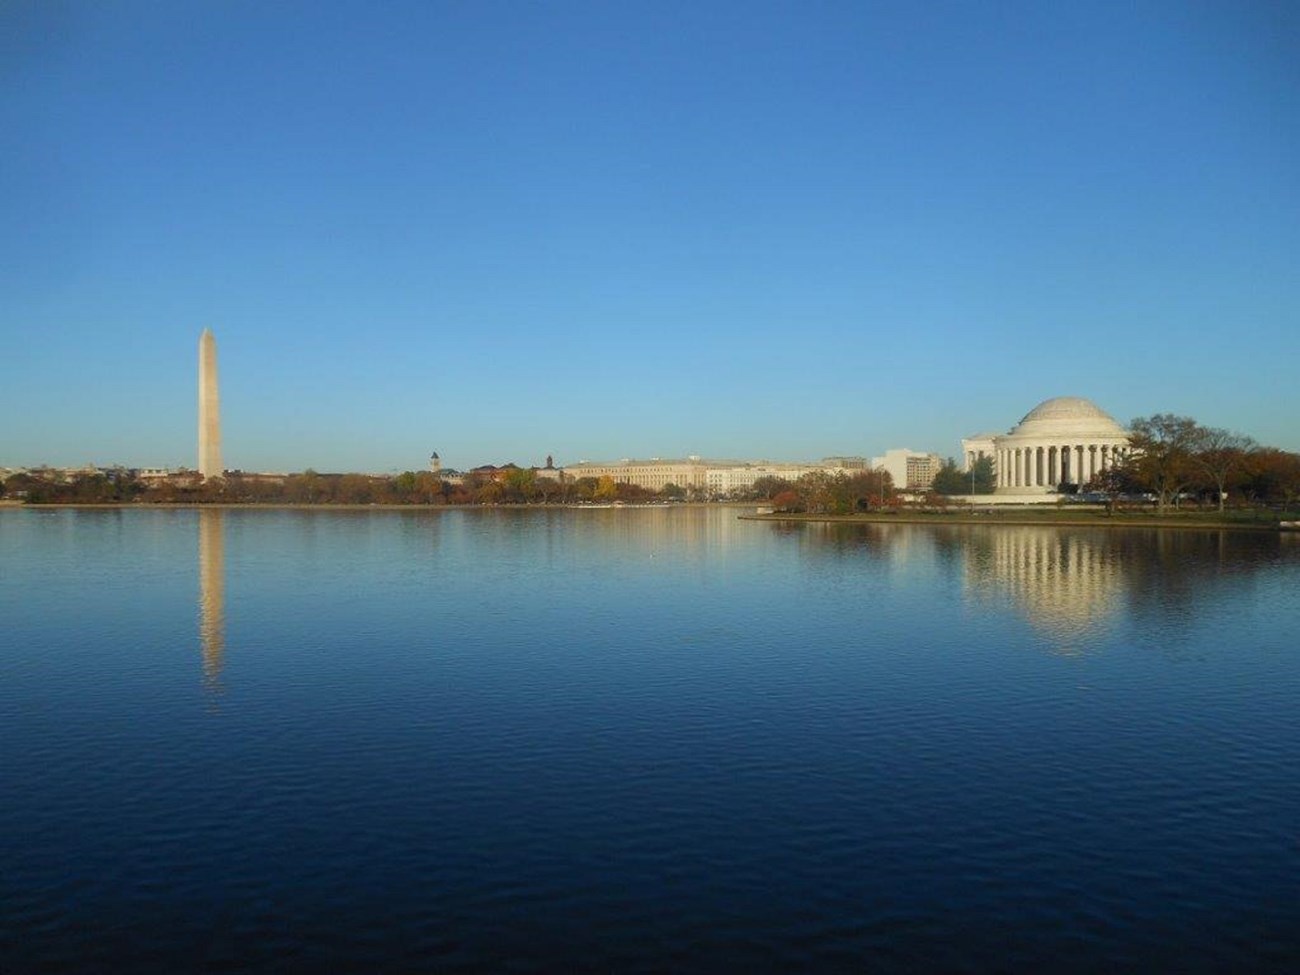 The Washington Monument and Jefferson Memorial from across the Potomac Tidal Basin